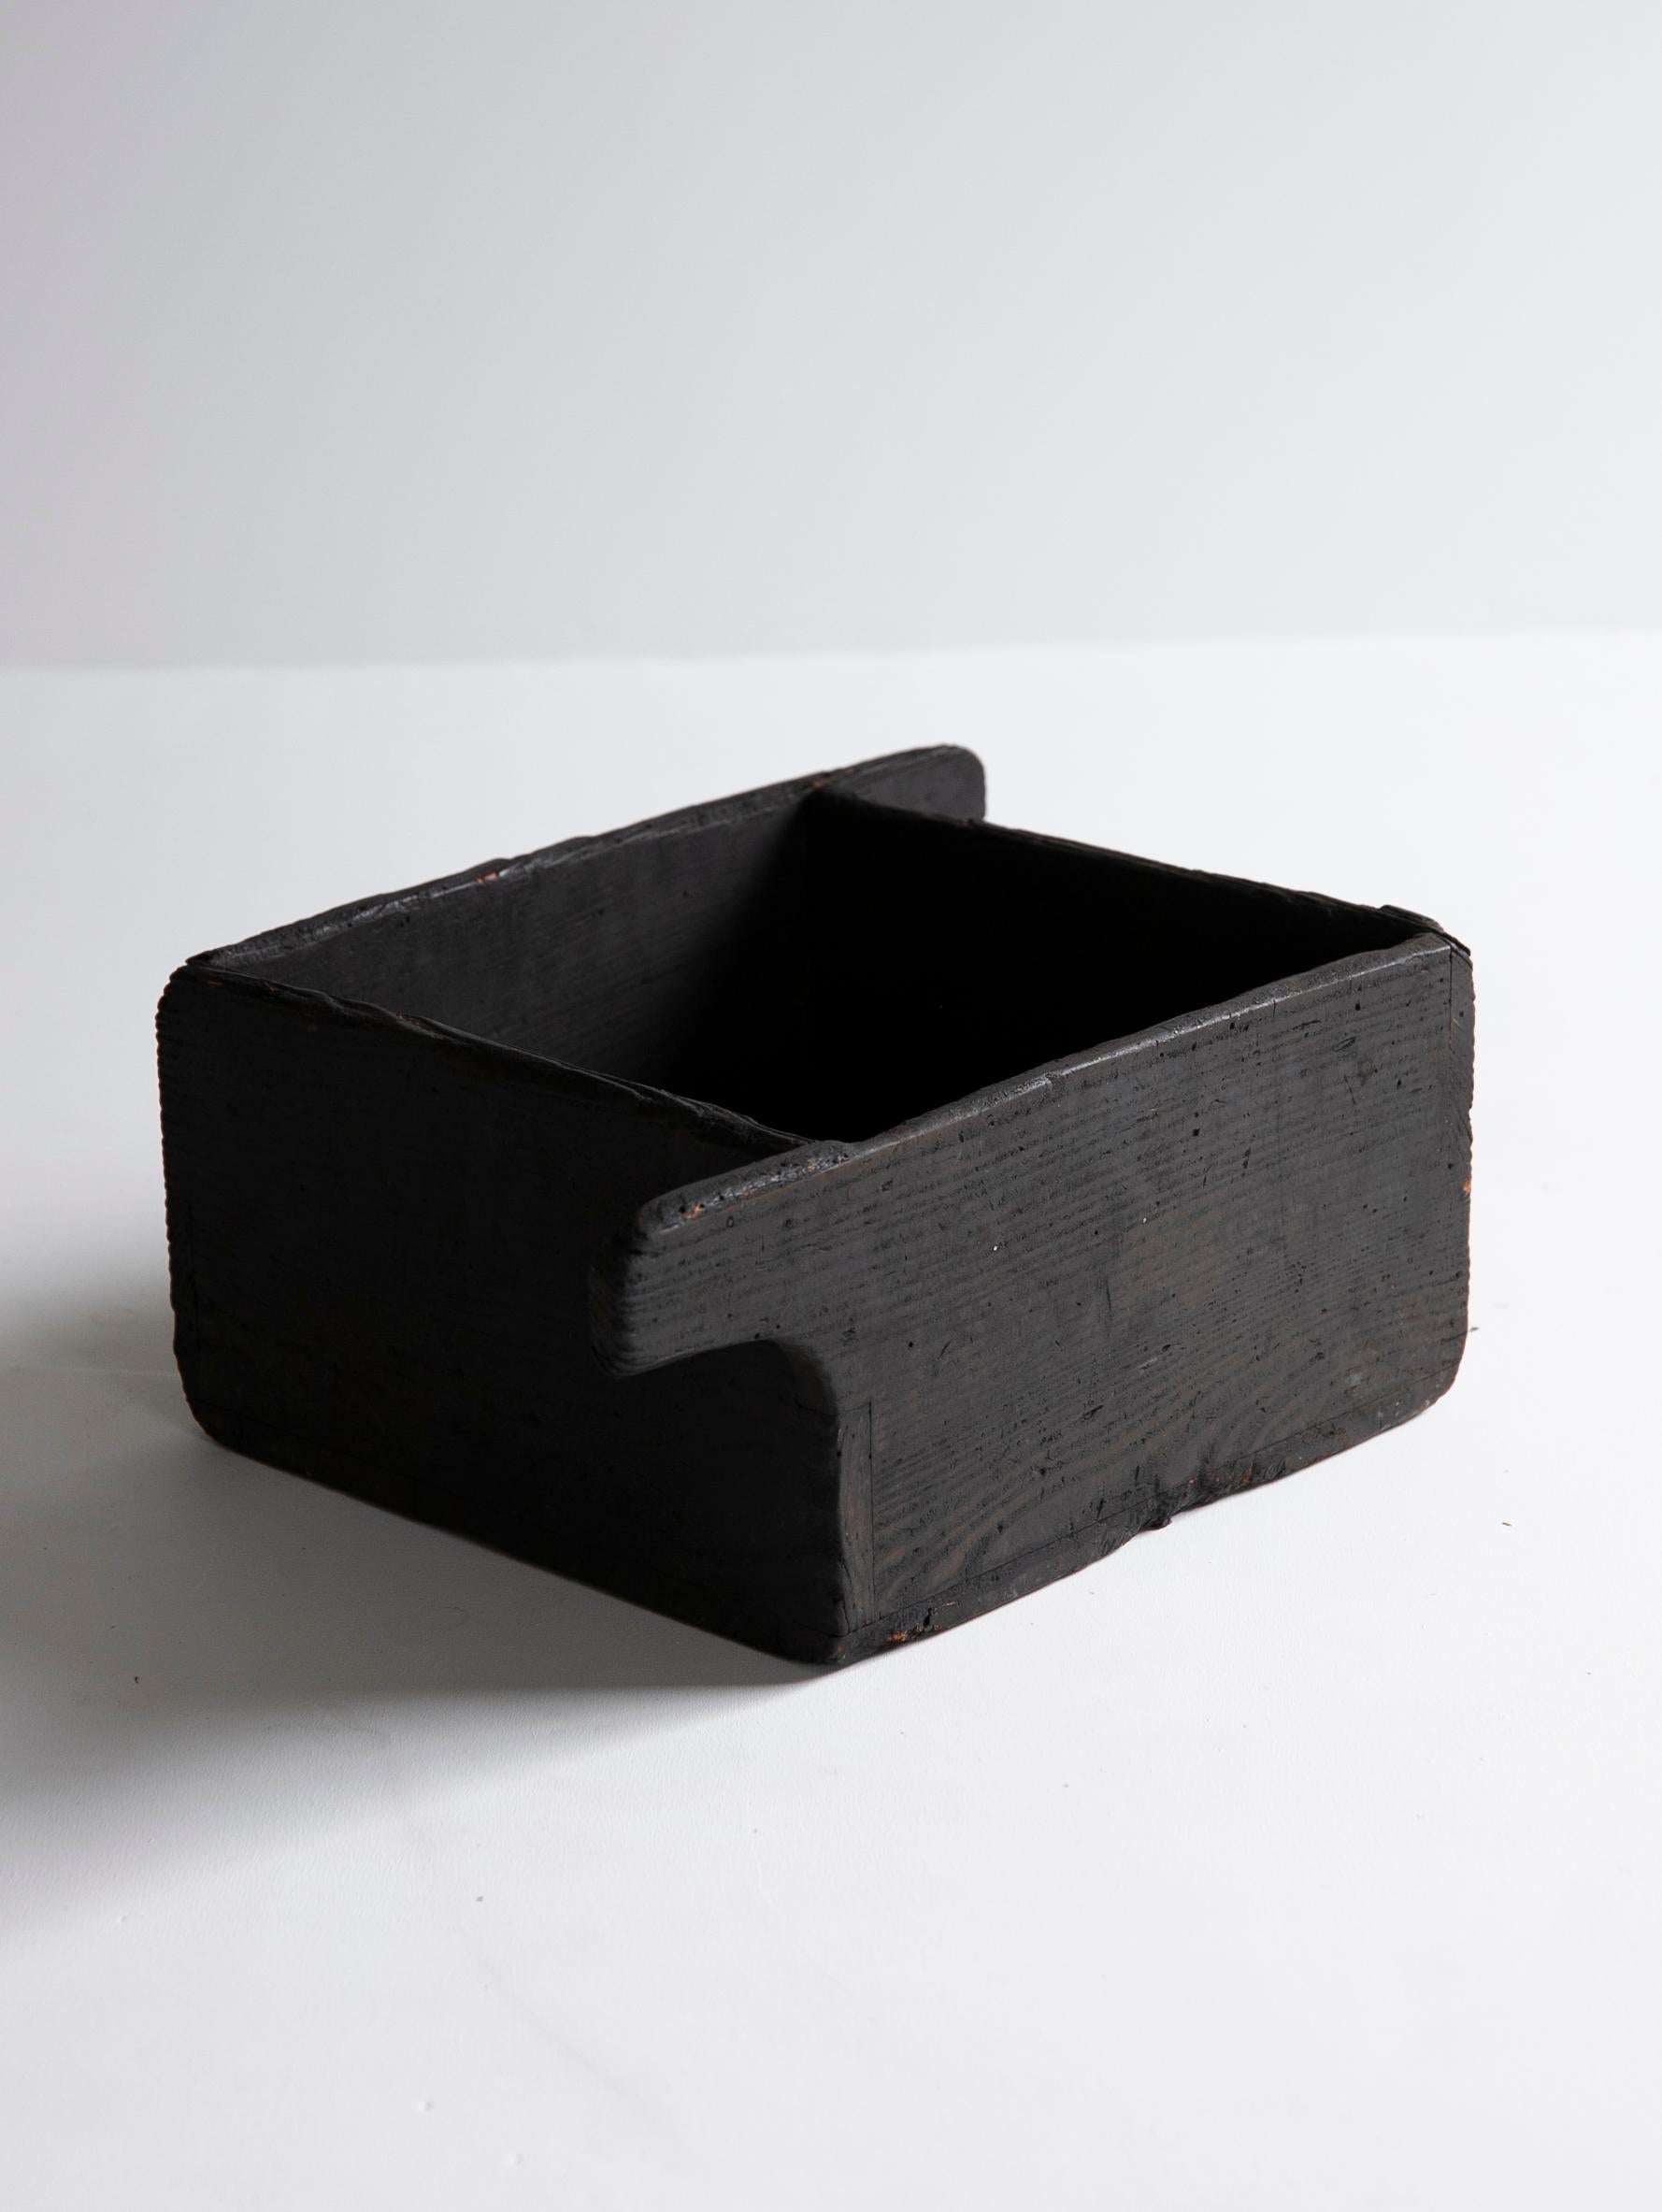 We have a uniquely Japanese aesthetic.
And our Japanese sourcing channels and our experience allow us to introduce unique items that no one else can imitate.

This is an old Japanese wooden box.
It was made between the end of the Edo period and